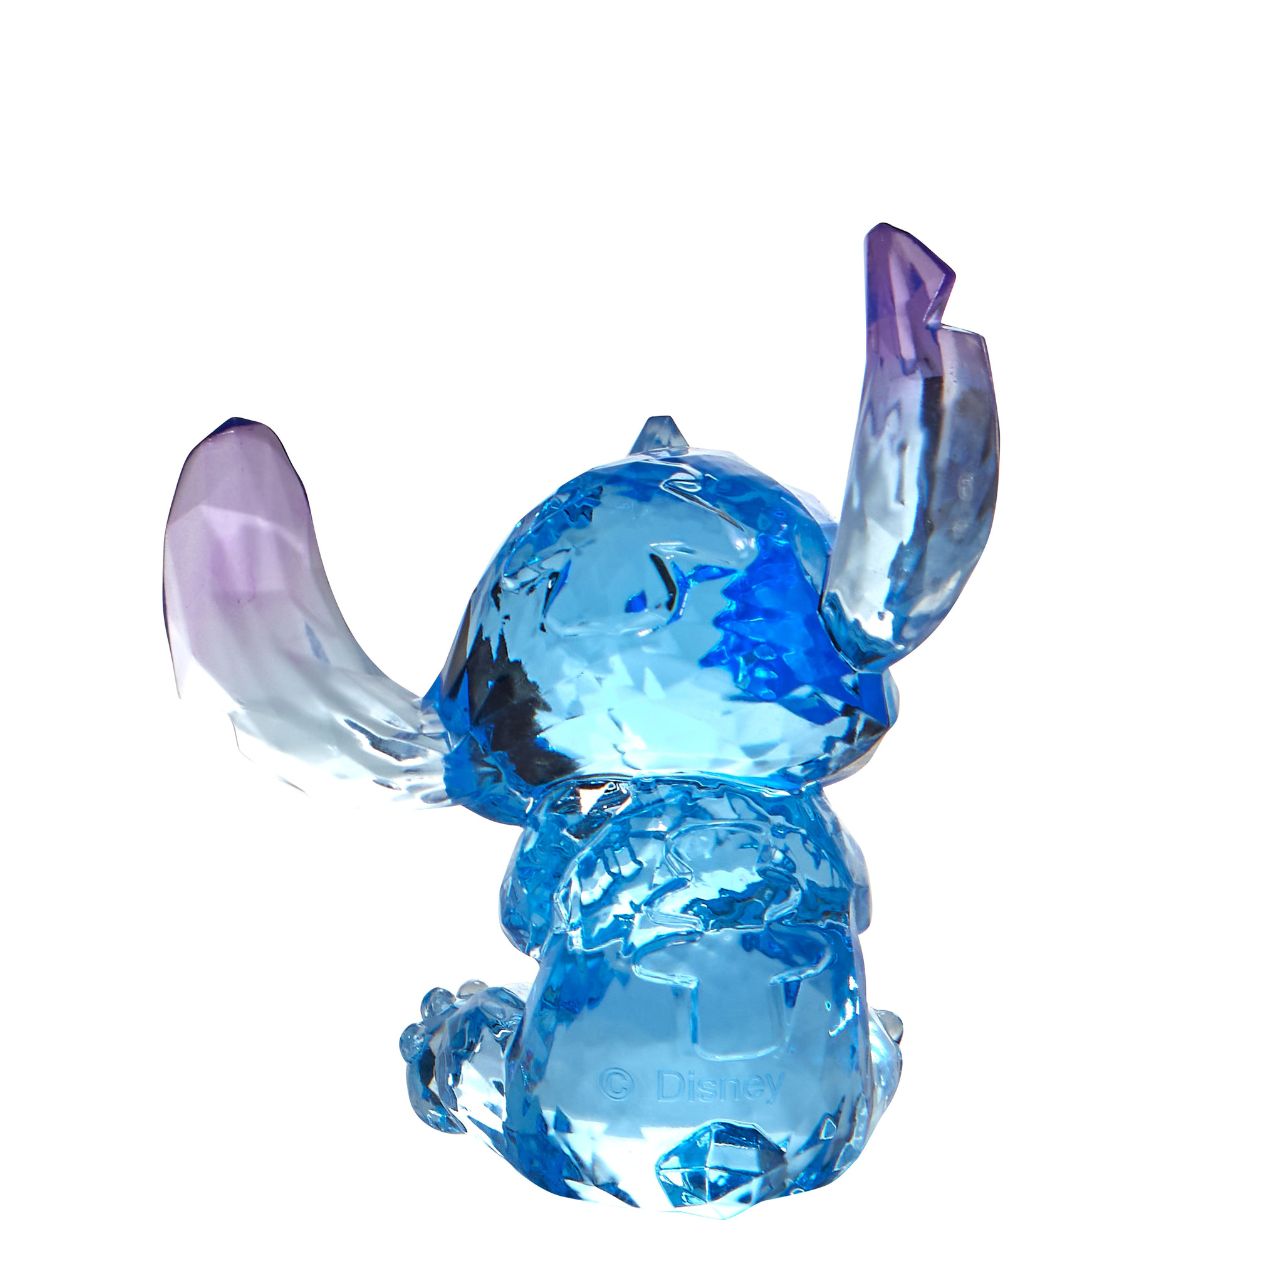 Disney Stitch Facets Figurine  This "gem cut" acrylic sculpture reflects Stitch's sparkling personality and childlike charm. Presented in a branded window gift box. Not a toy or children's product. Intended for adults only.